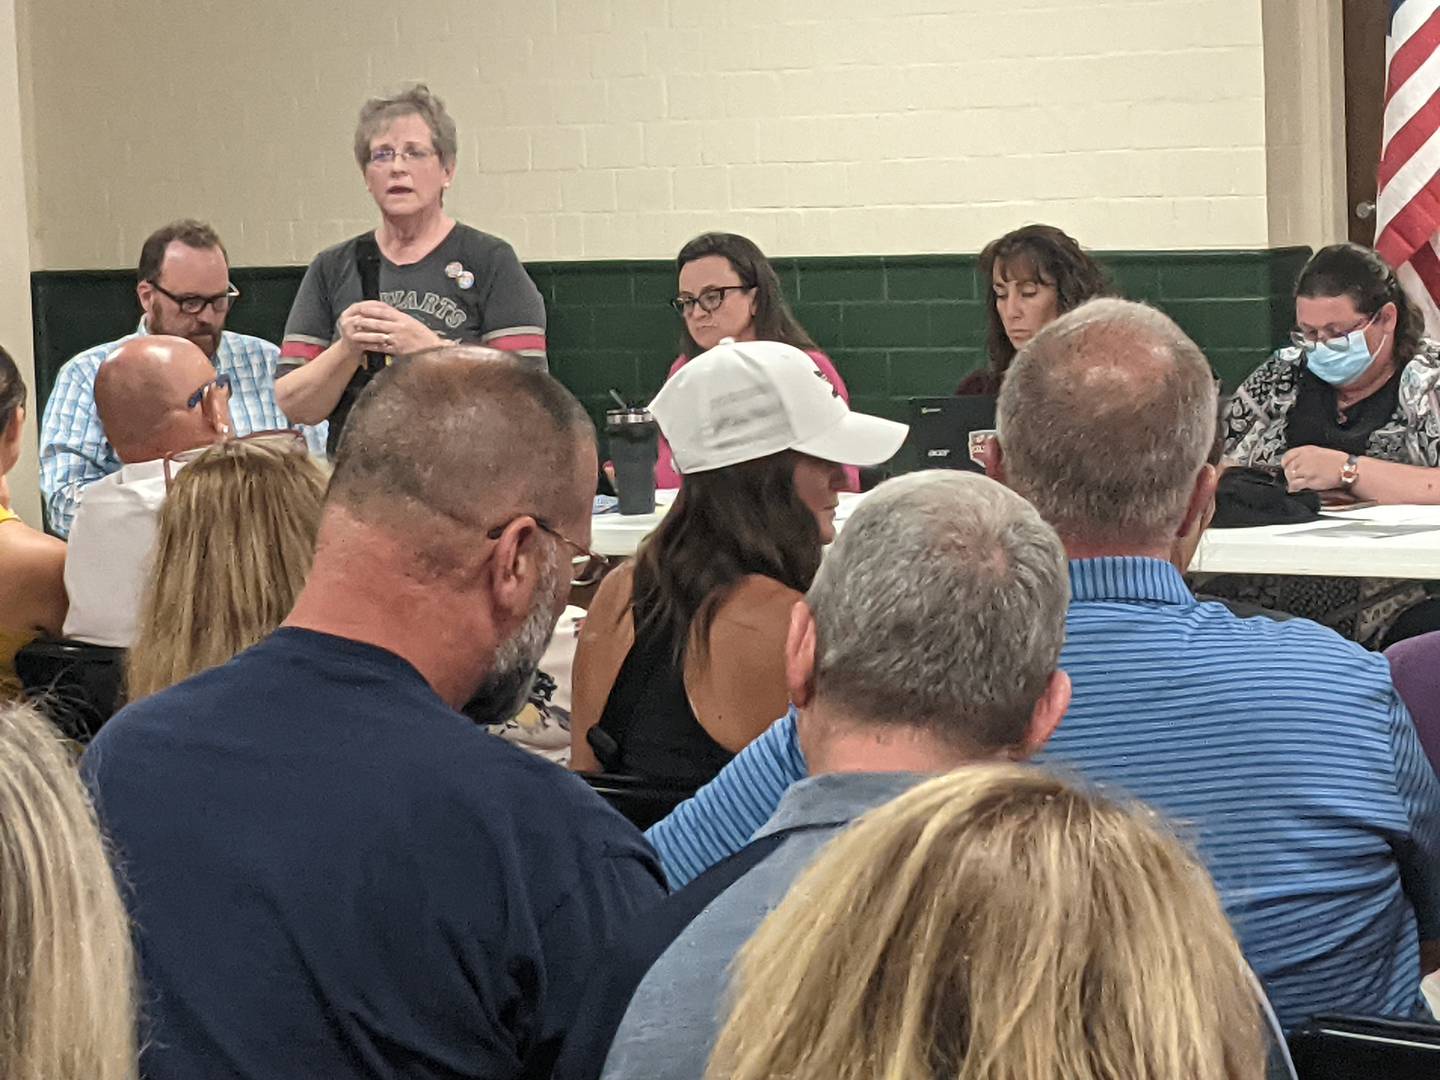 Kristine Schauff, library director at Rock Falls High School, speaks during the Dixon Public Library Board meeting July 11, 2022, against requests to remove LGBTQ comic books from the library.